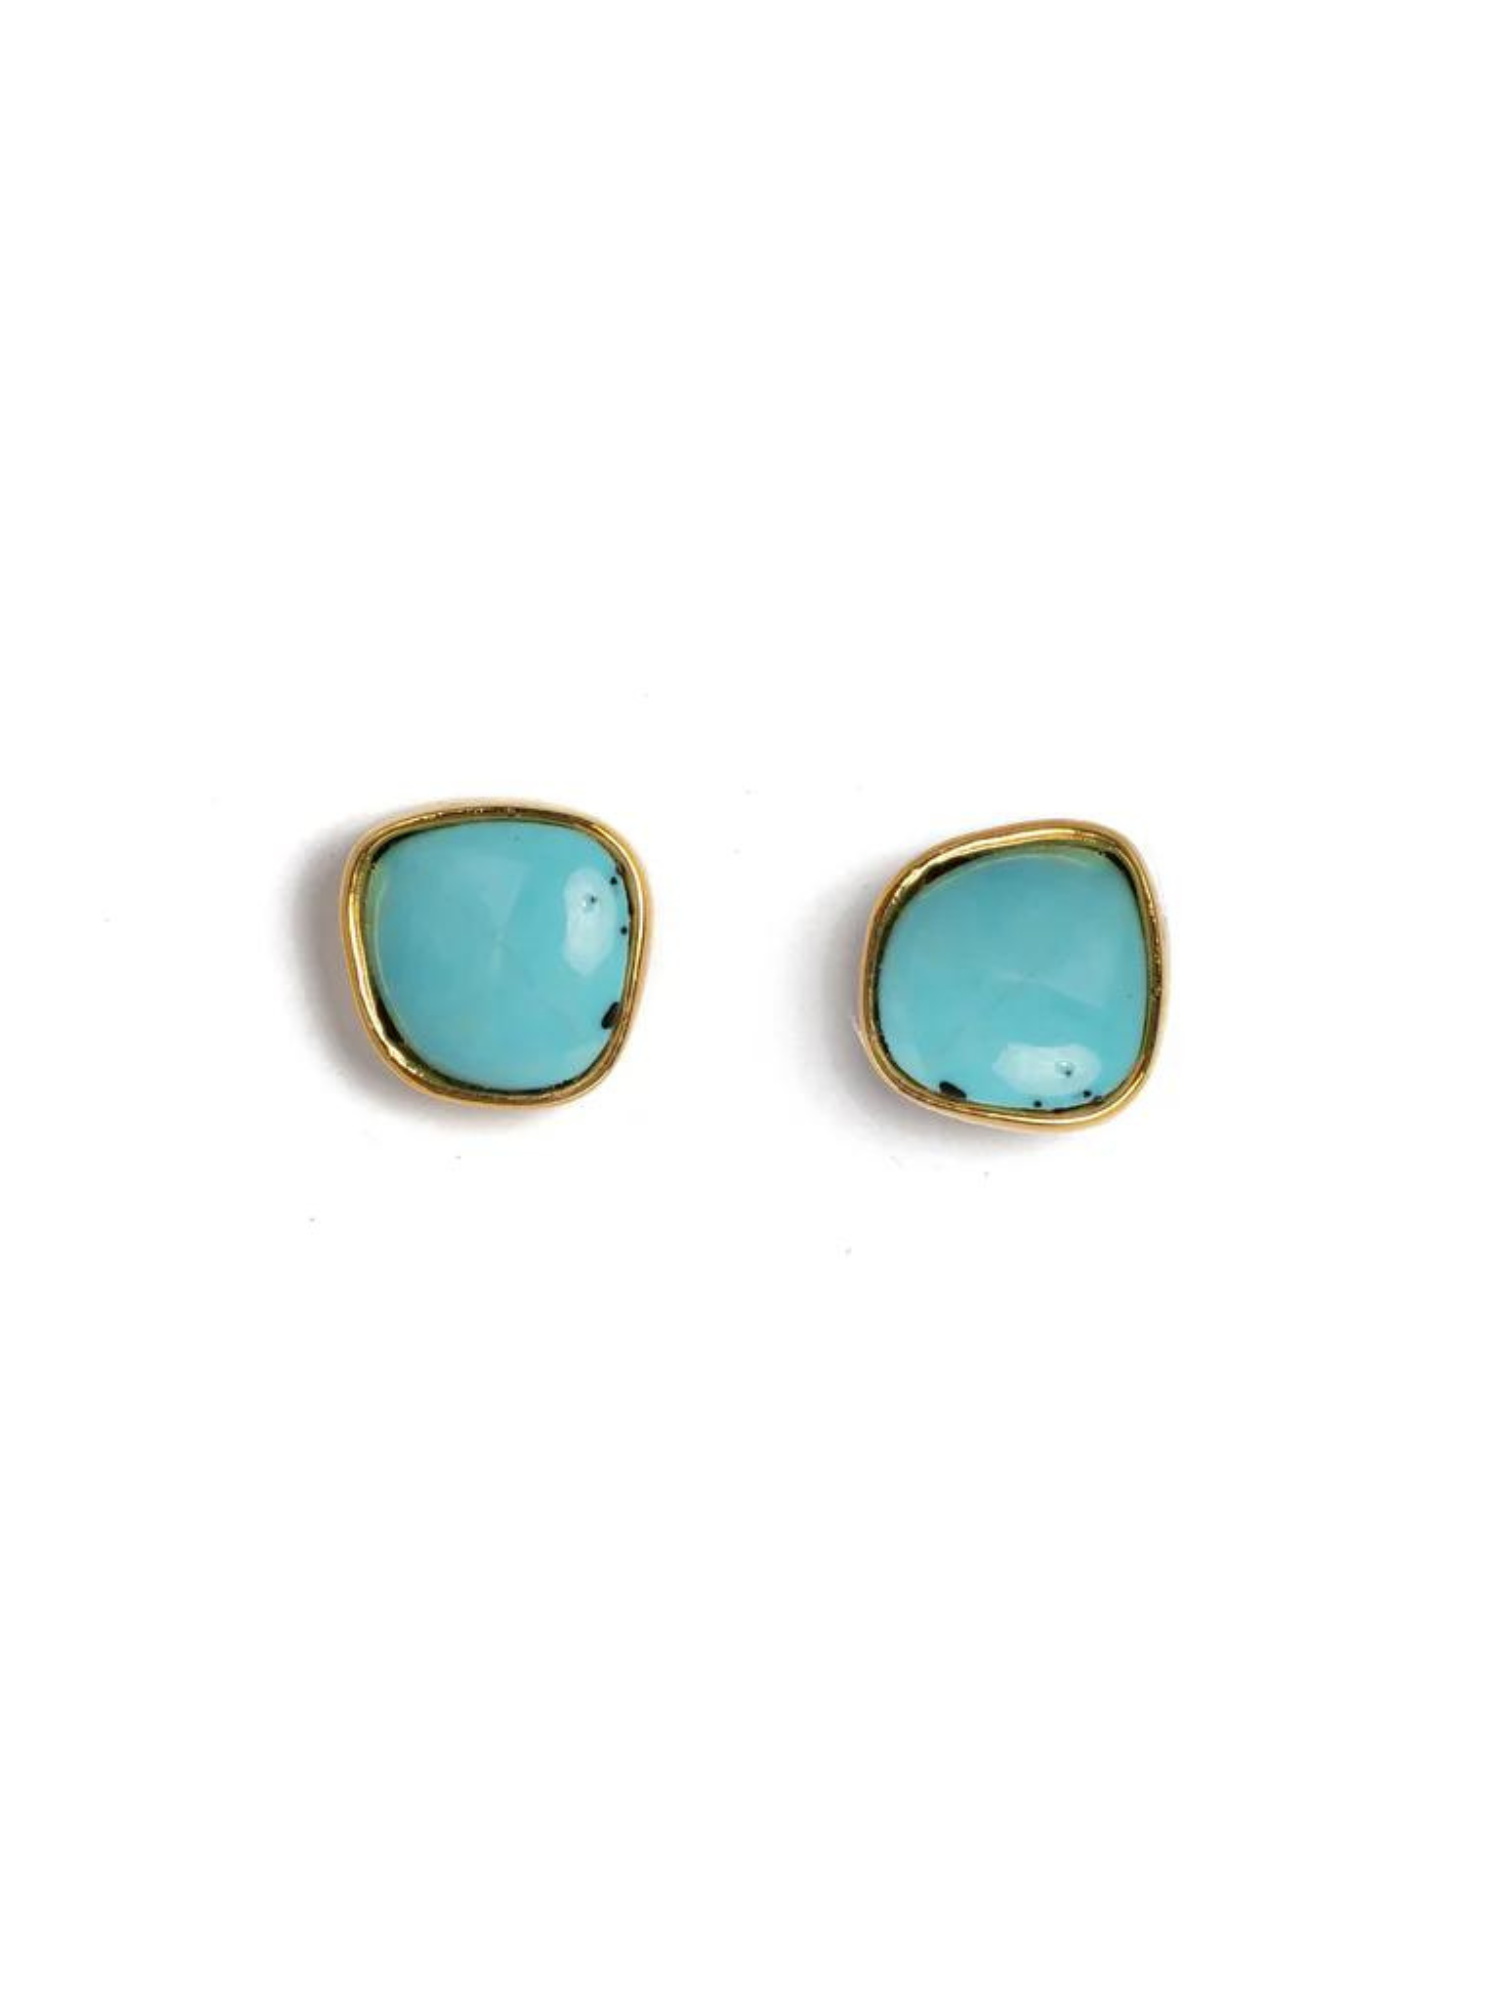 Lizzie Fortunato Bay Studs in Turquoise